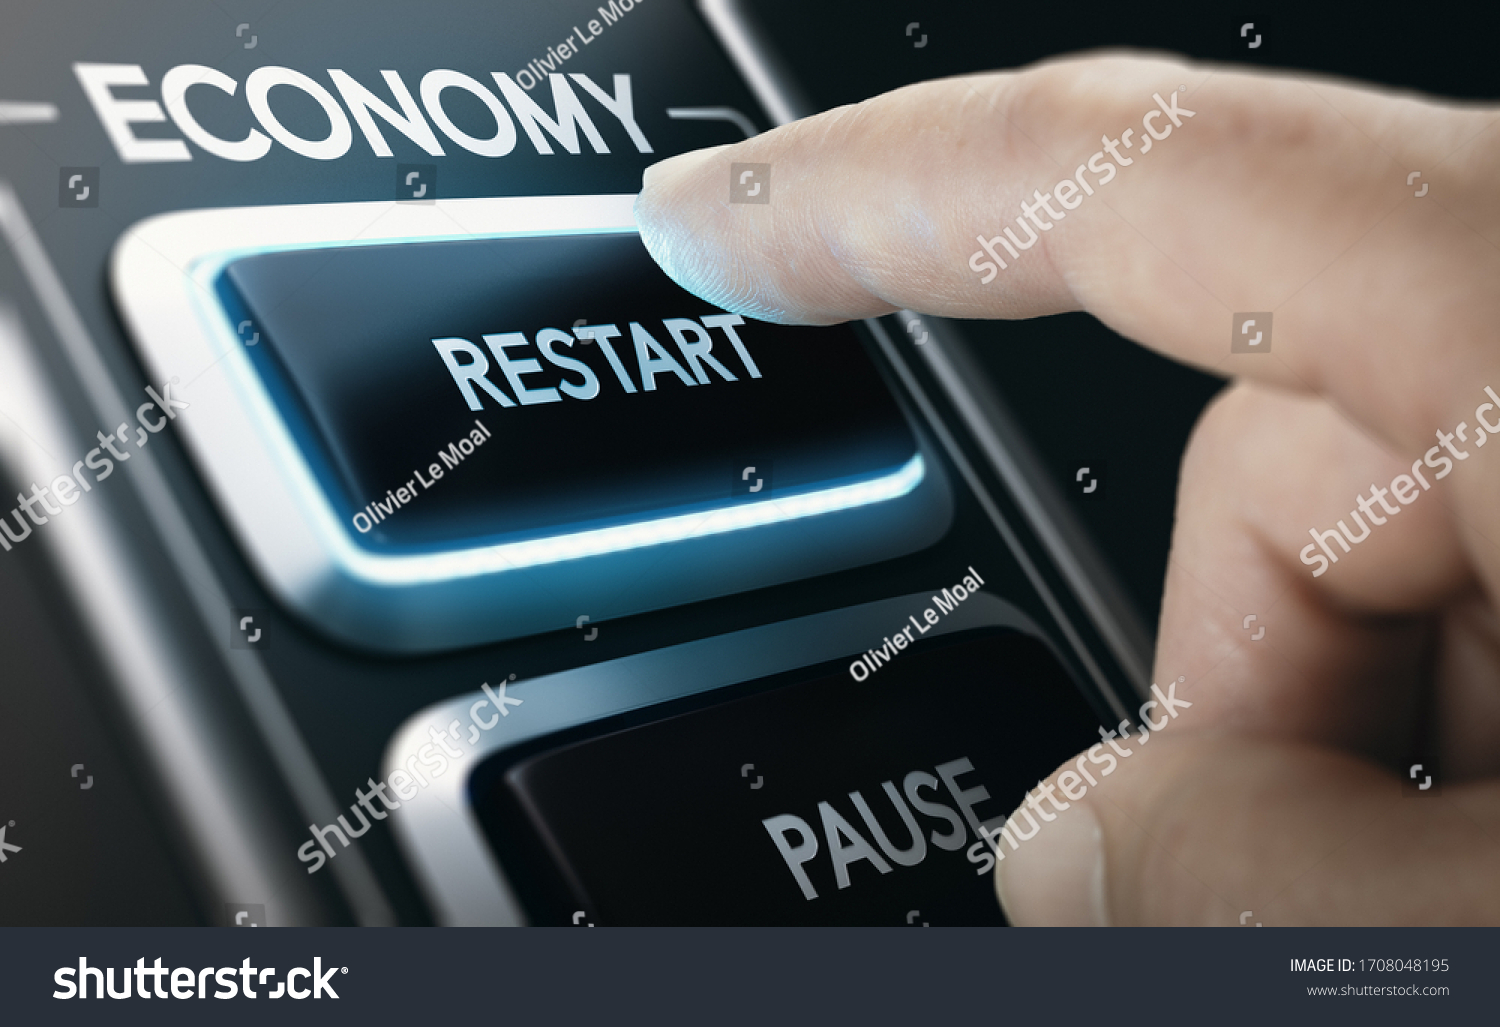 Man pressing a button to restart national economy after crisis. Composite image between a hand photography and a 3D background. #1708048195